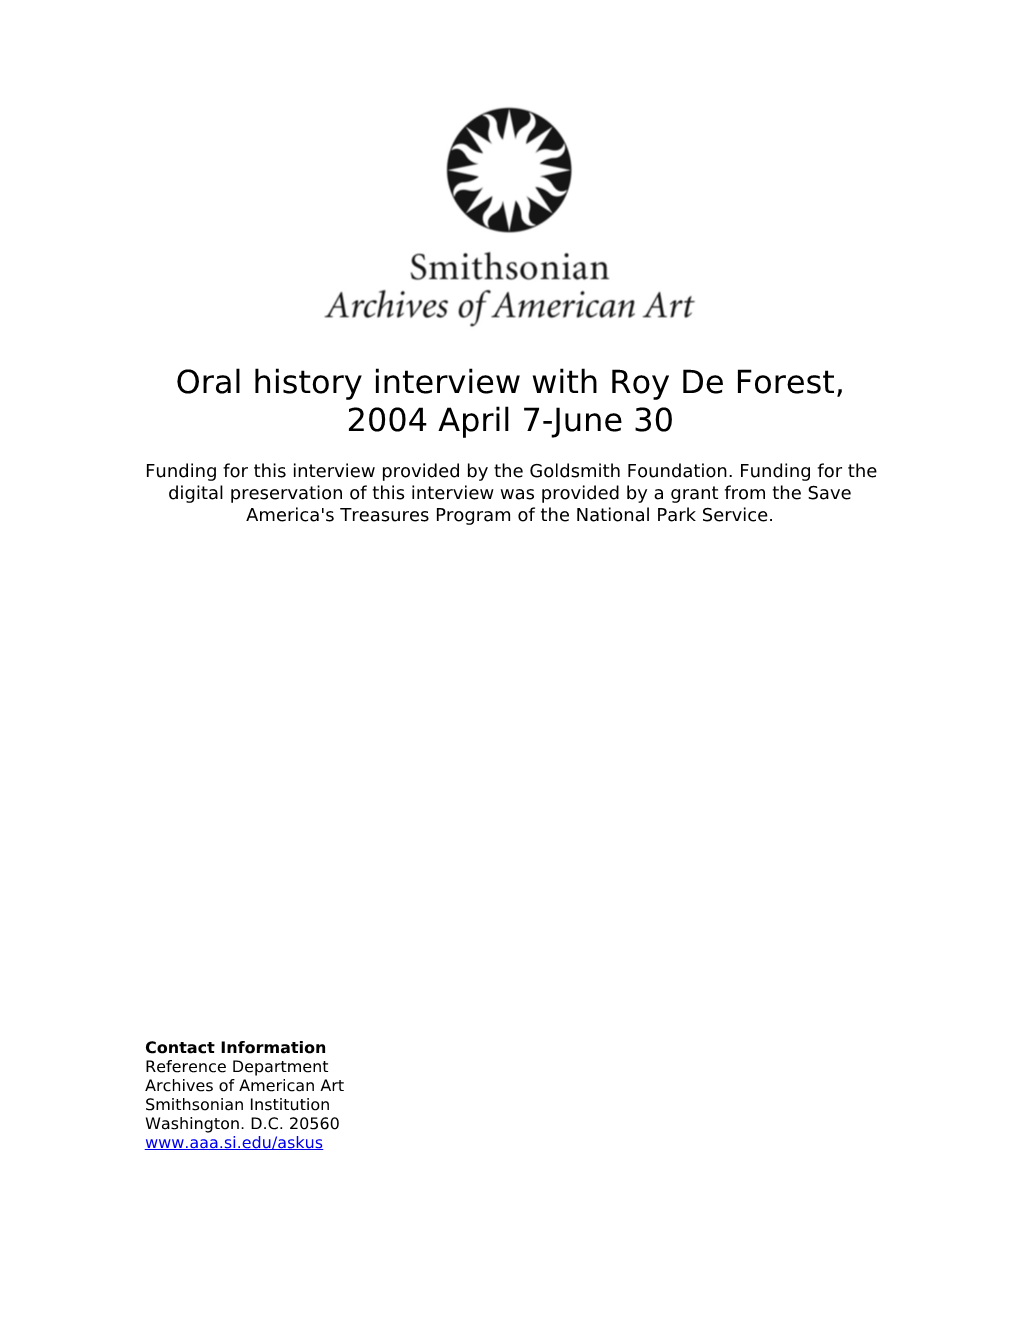 Oral History Interview with Roy De Forest, 2004 April 7-June 30